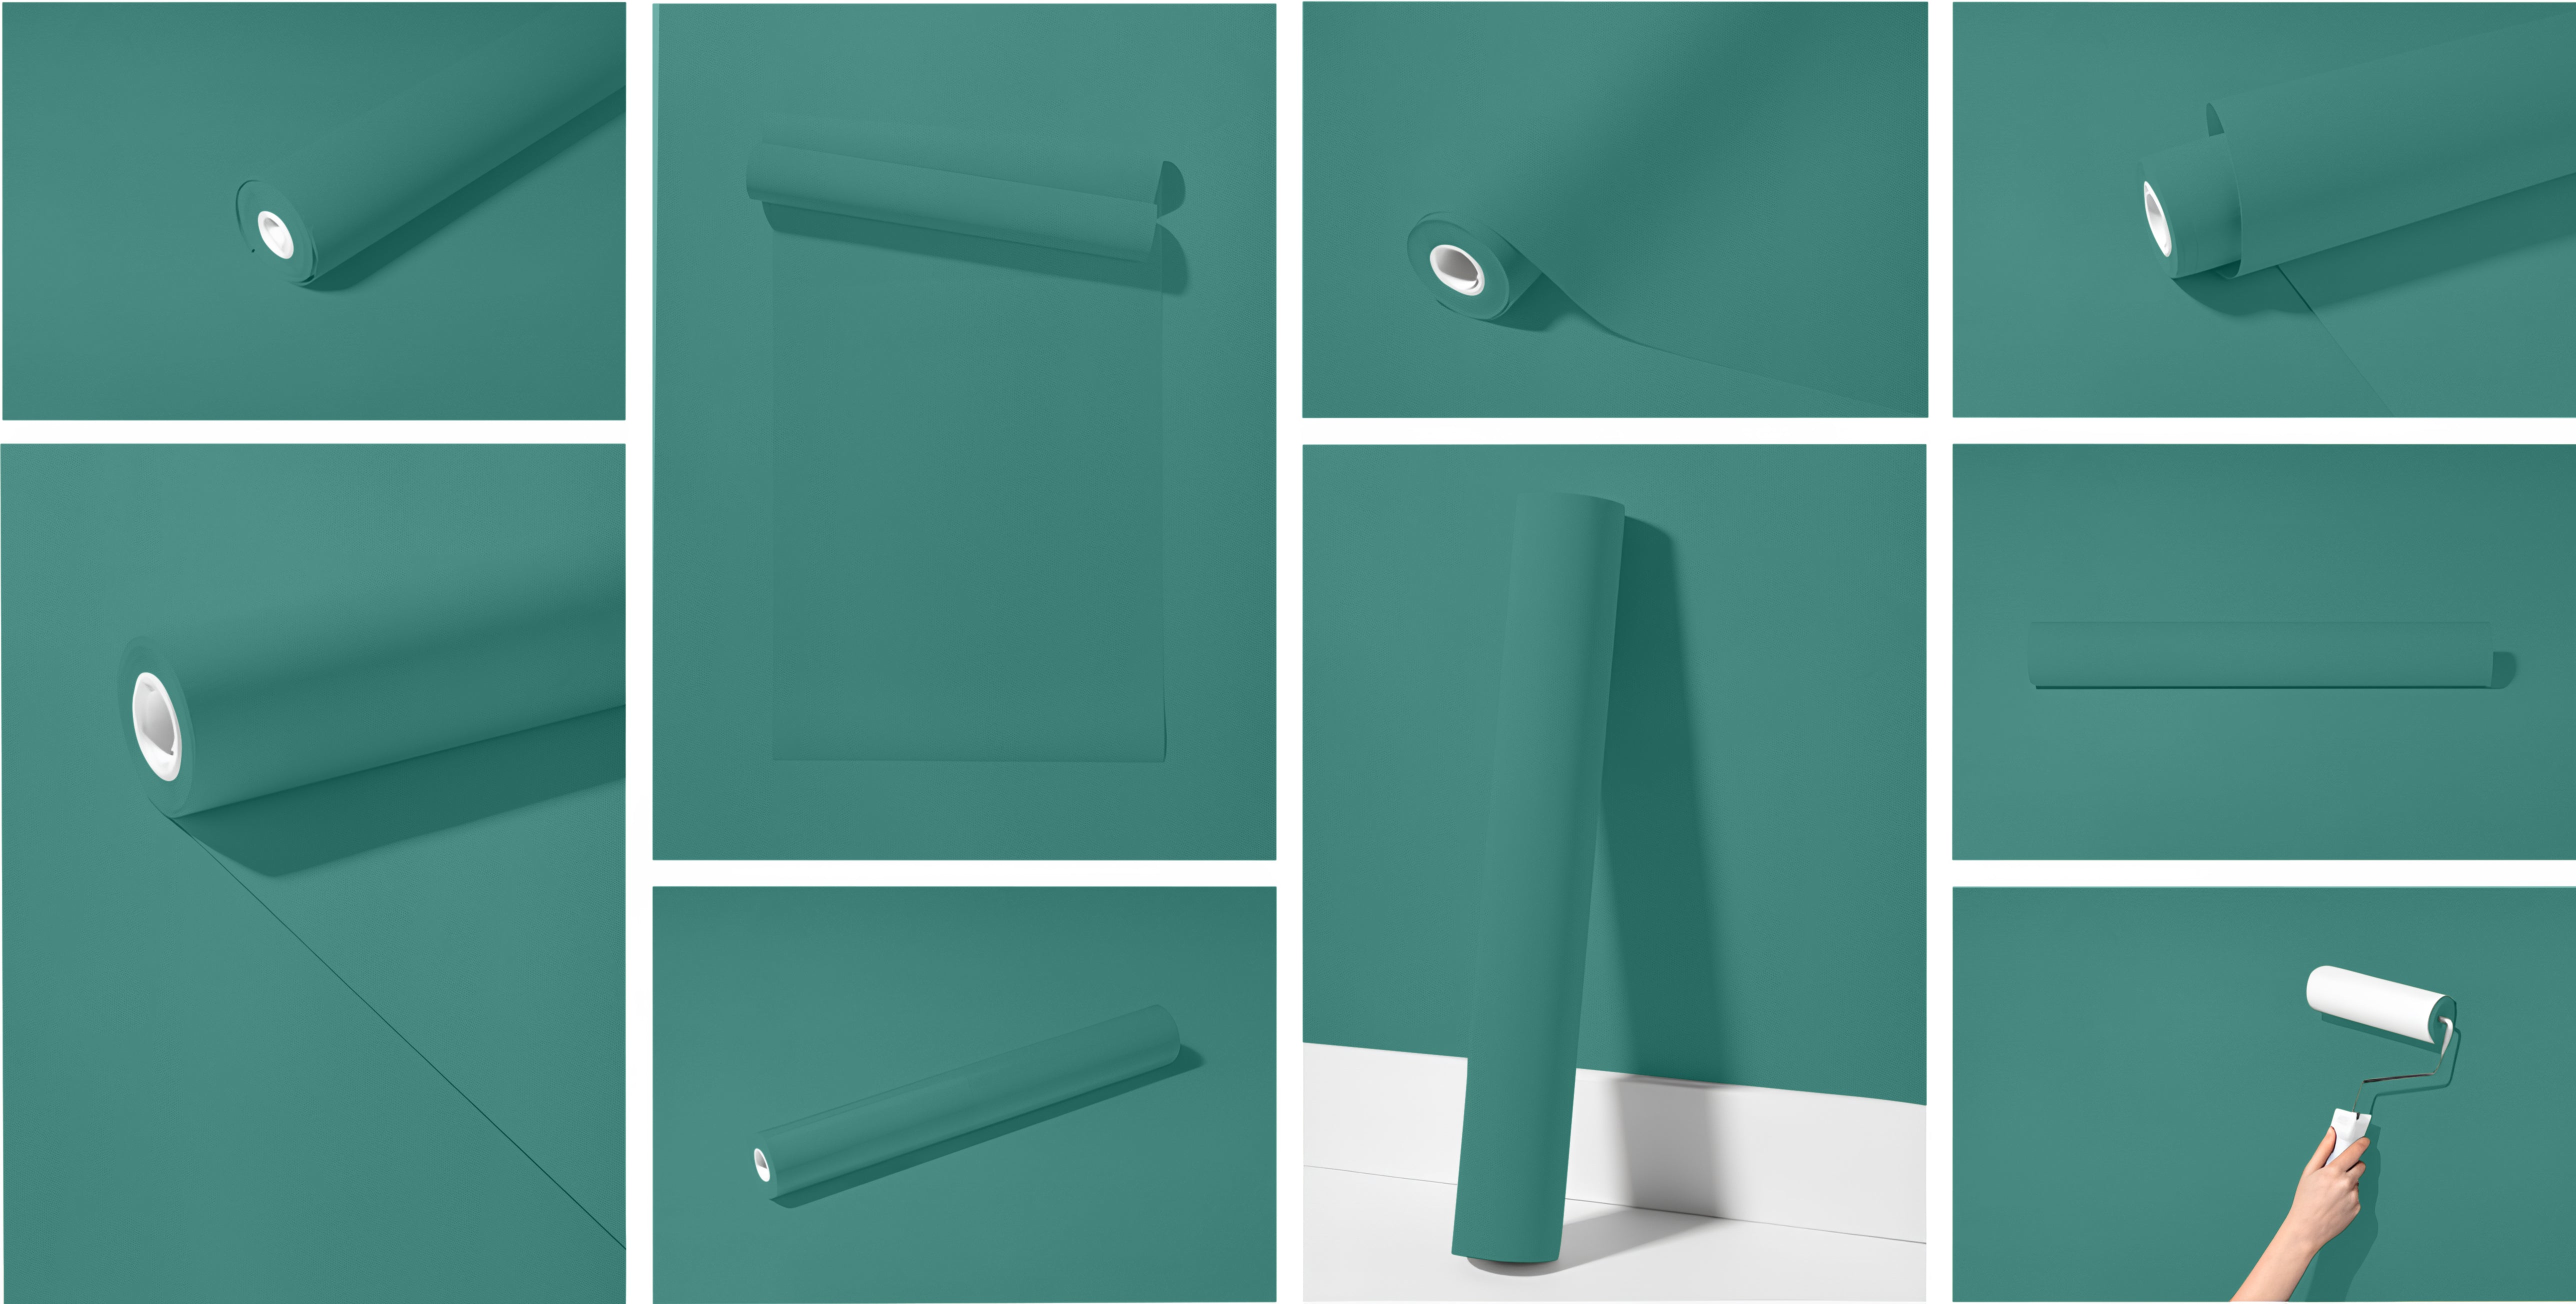 Peel & Stick Removable Re-usable Paint - Color RAL 6033 Mint Turquoise - offRAL™ - RALRAW LLC, USA